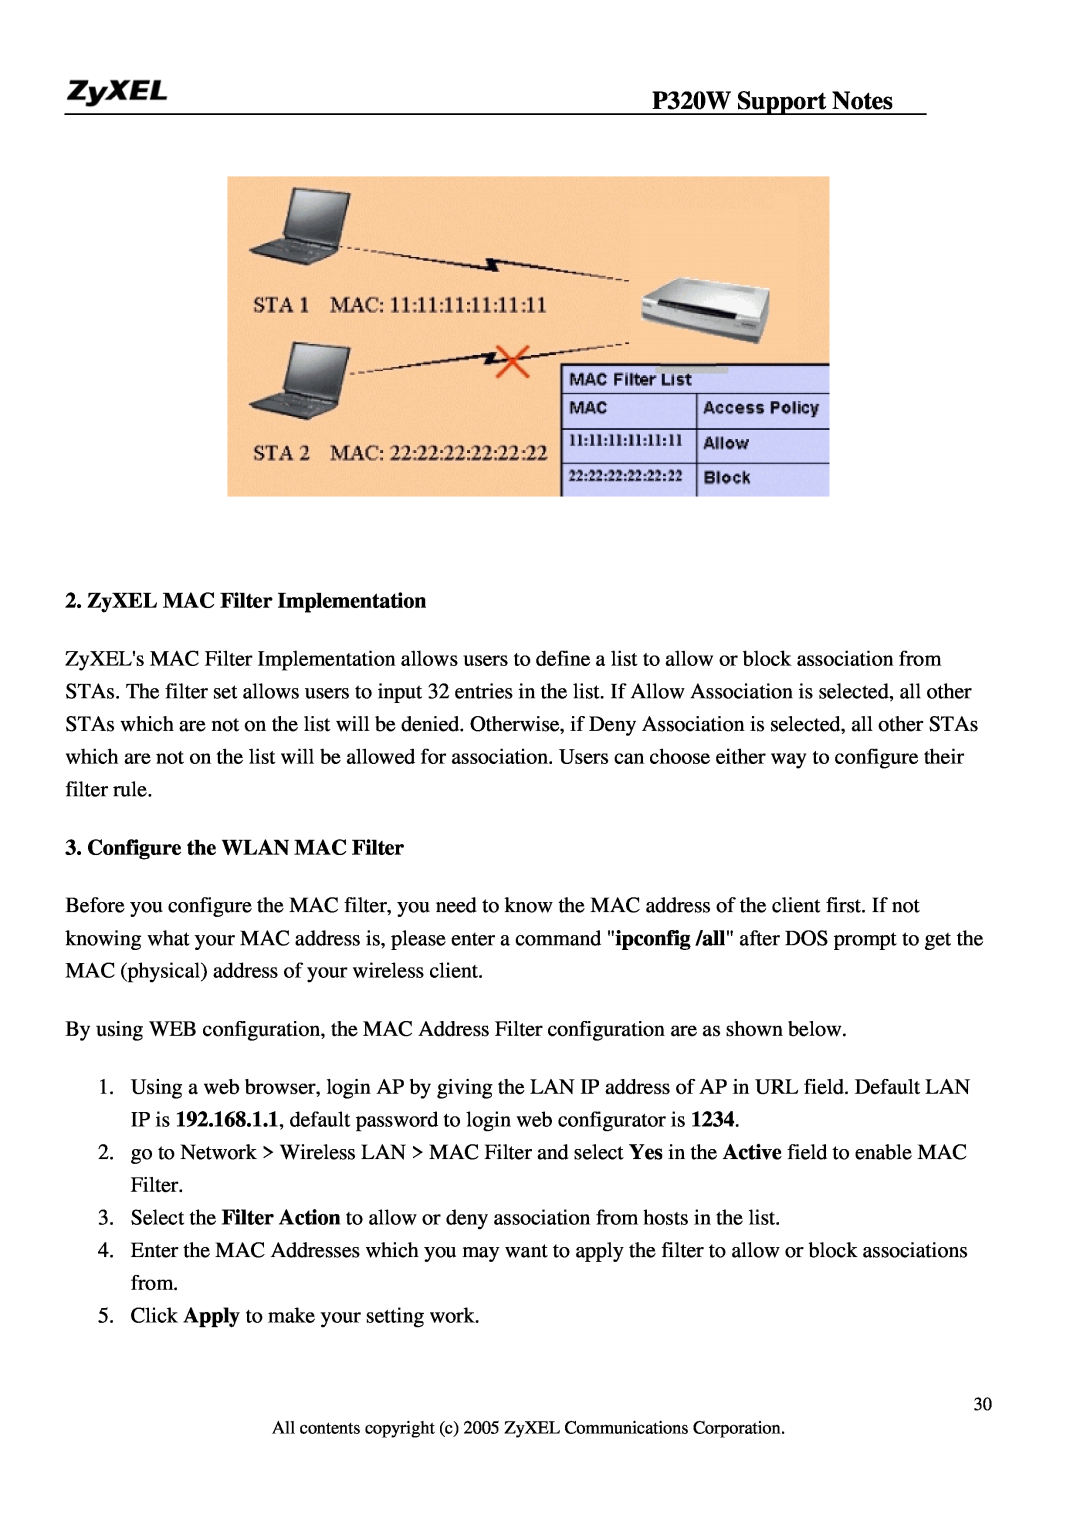 ZyXEL Communications manual ZyXEL MAC Filter Implementation, Configure the WLAN MAC Filter, P320W Support Notes 